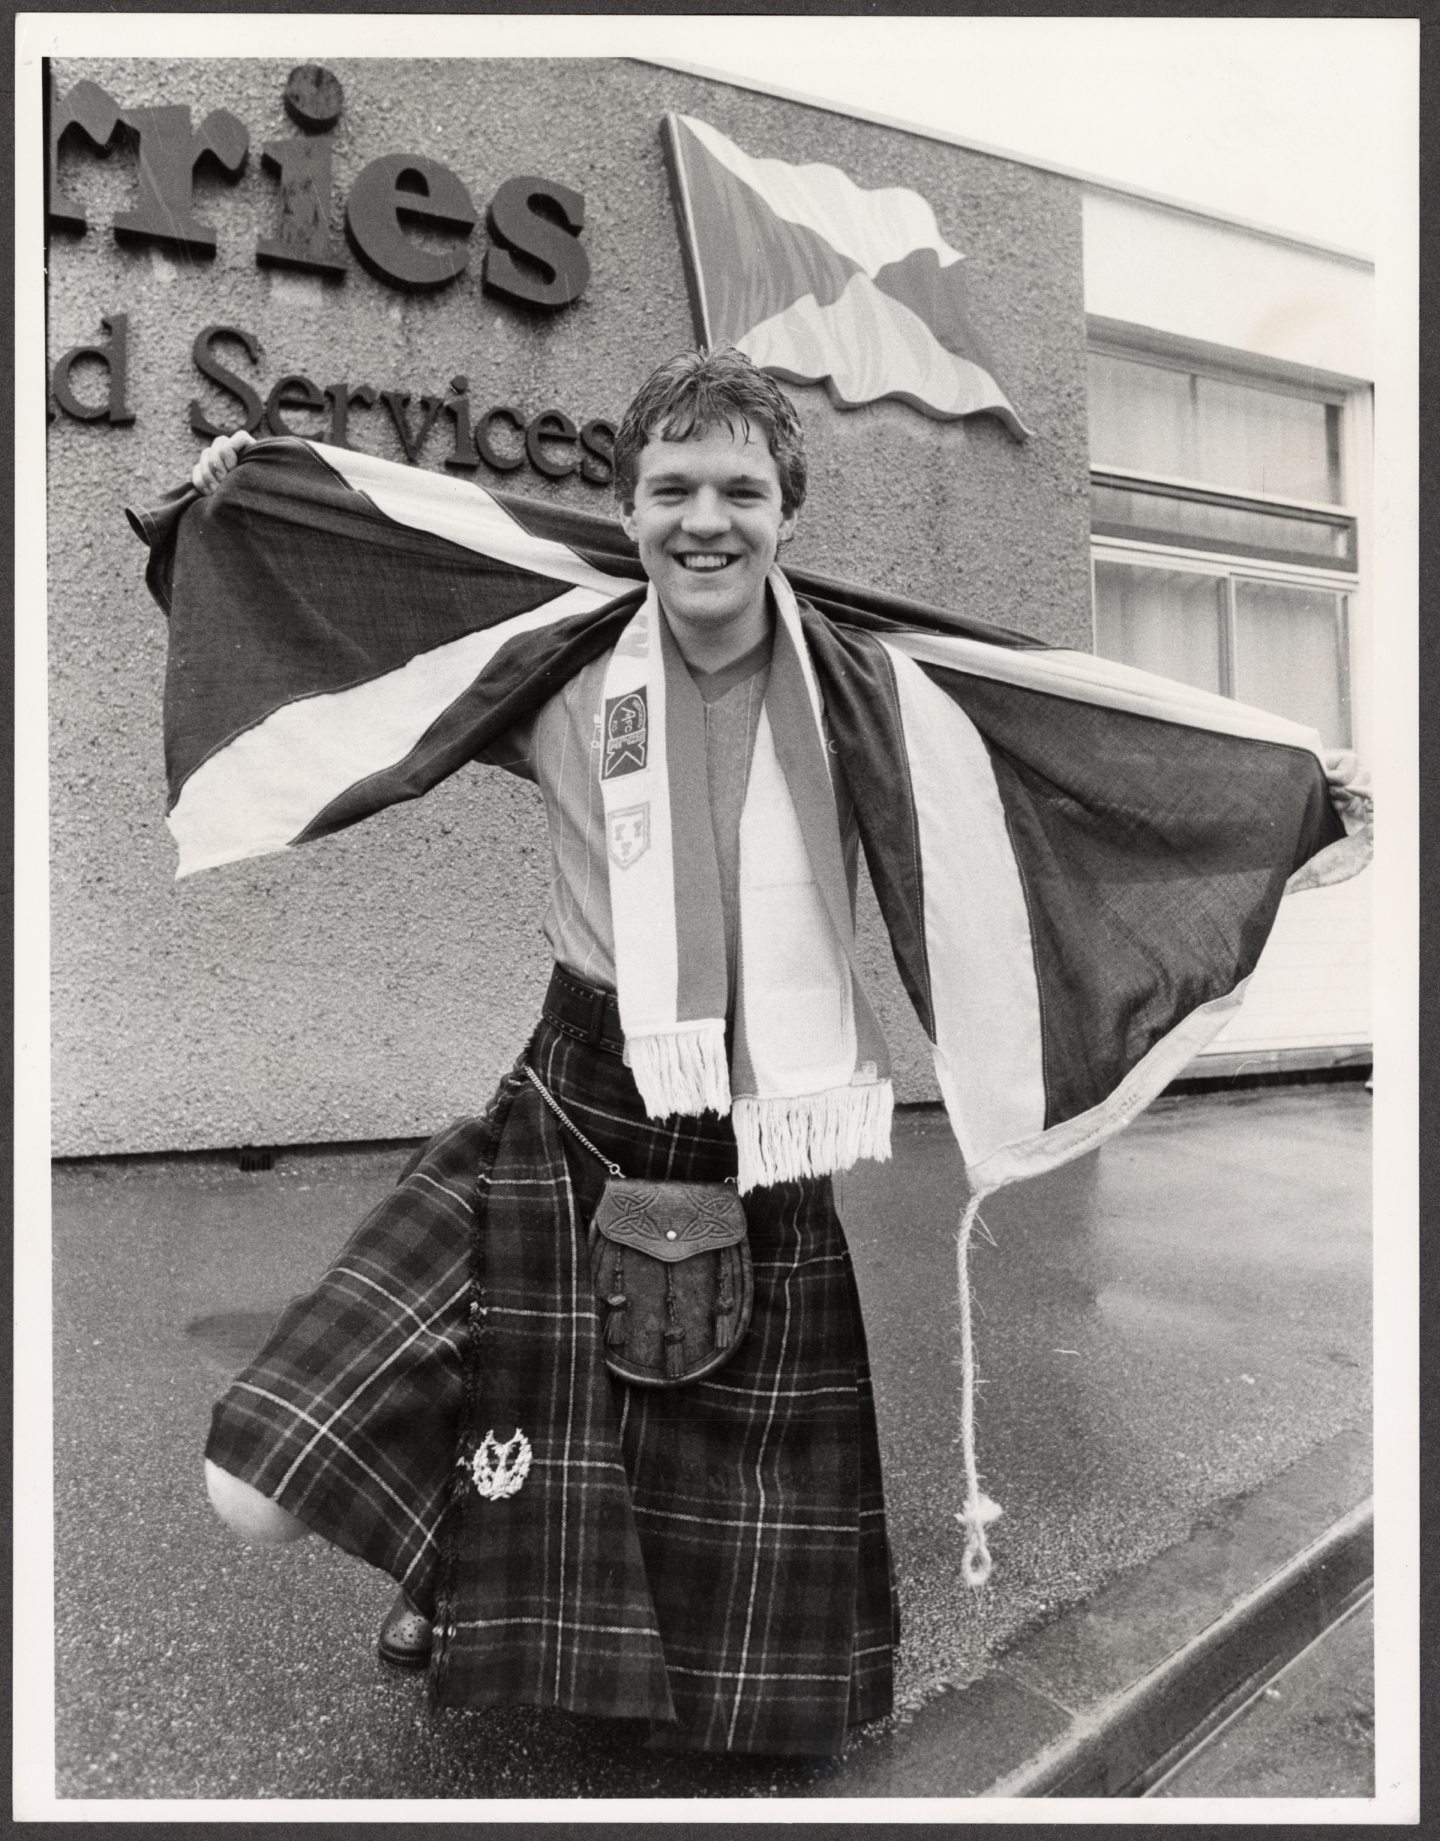 Scott Paterson, Deeside Gardens, Aberdeen, was flying the flag on the trip. Image: DC Thomson.